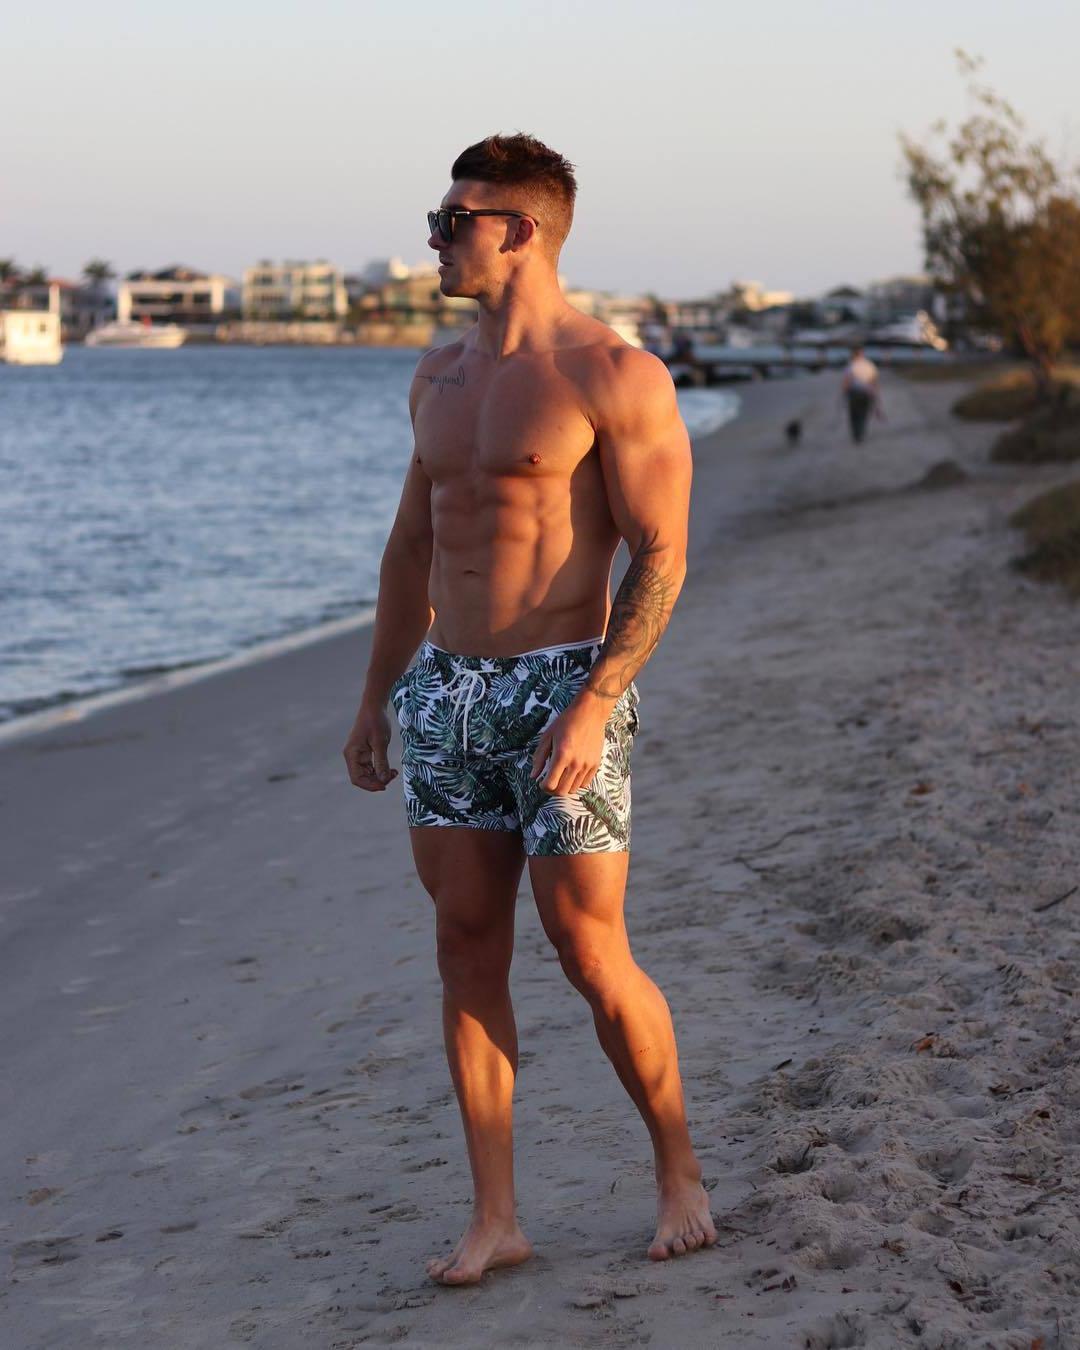 huge-beefy-shirtless-beach-hunk-blake-williamson-sunglasses-dilf-abs-strong-swole-body-straight-daddy